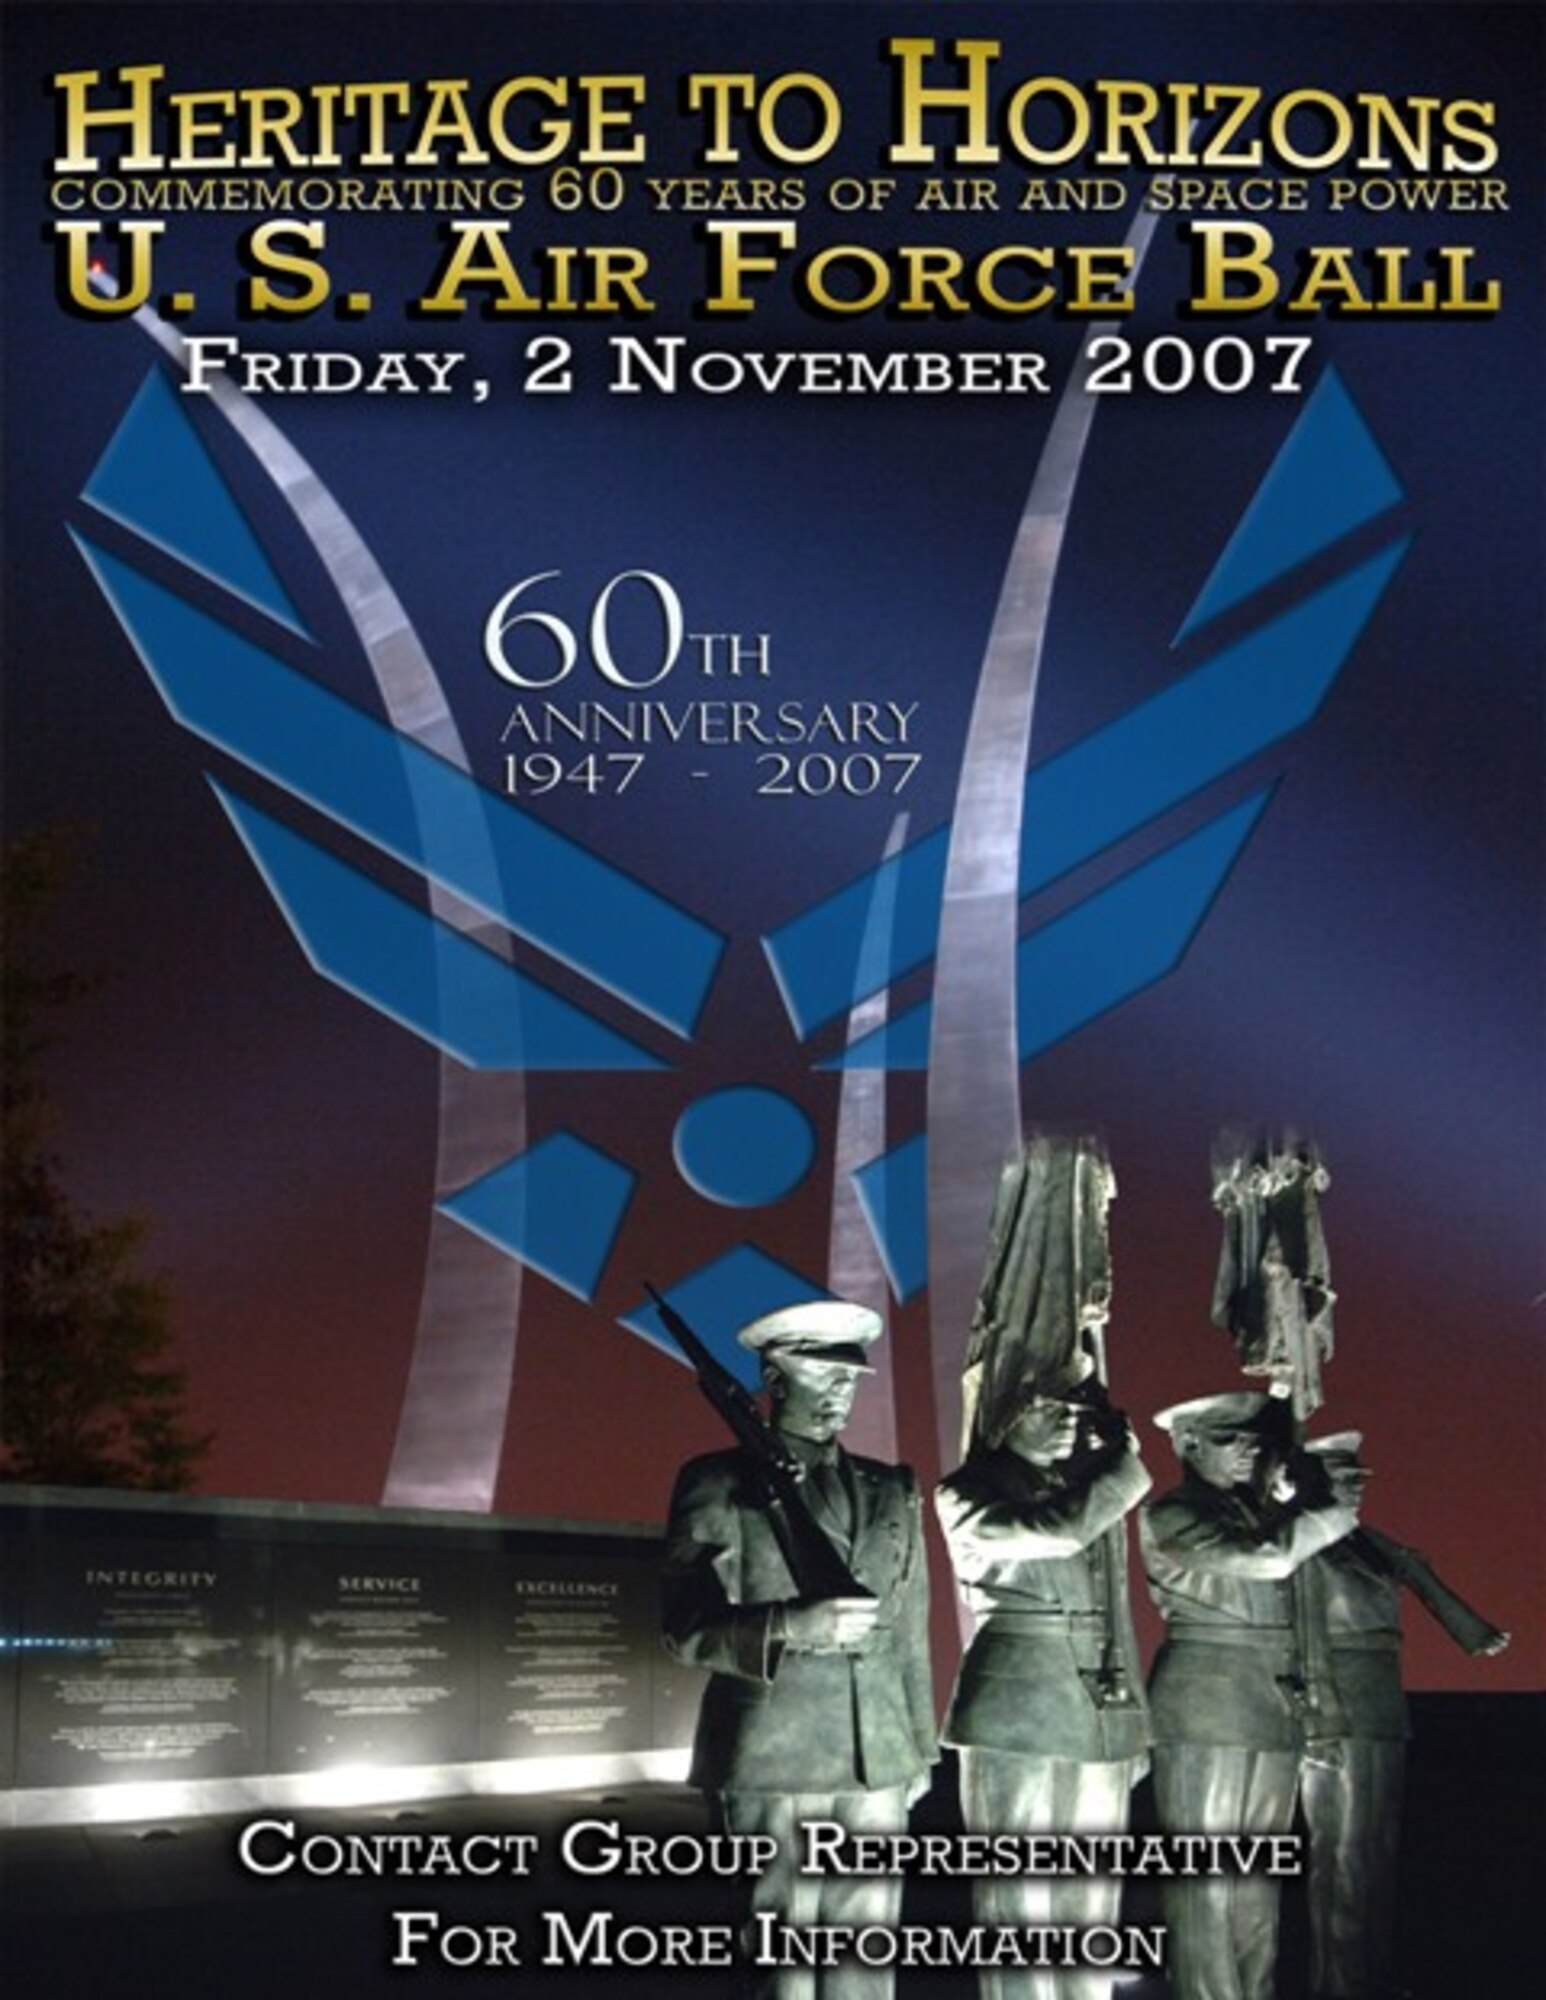 The 482nd FW will host the “Heritage to Horizons” Air Force Ball at the Miami International Airport Hilton Hotel on Nov. 2, with the cocktail hour beginning at 7 p.m., and the dinner following at 8 p.m. Tickets are currently available for for $25 for grades E1-E6 and $40 for grades E7-E9 and officers. See story for contact information for unit or group representatives. (Graphic by Tech. Sgt. Ryan Ayers)